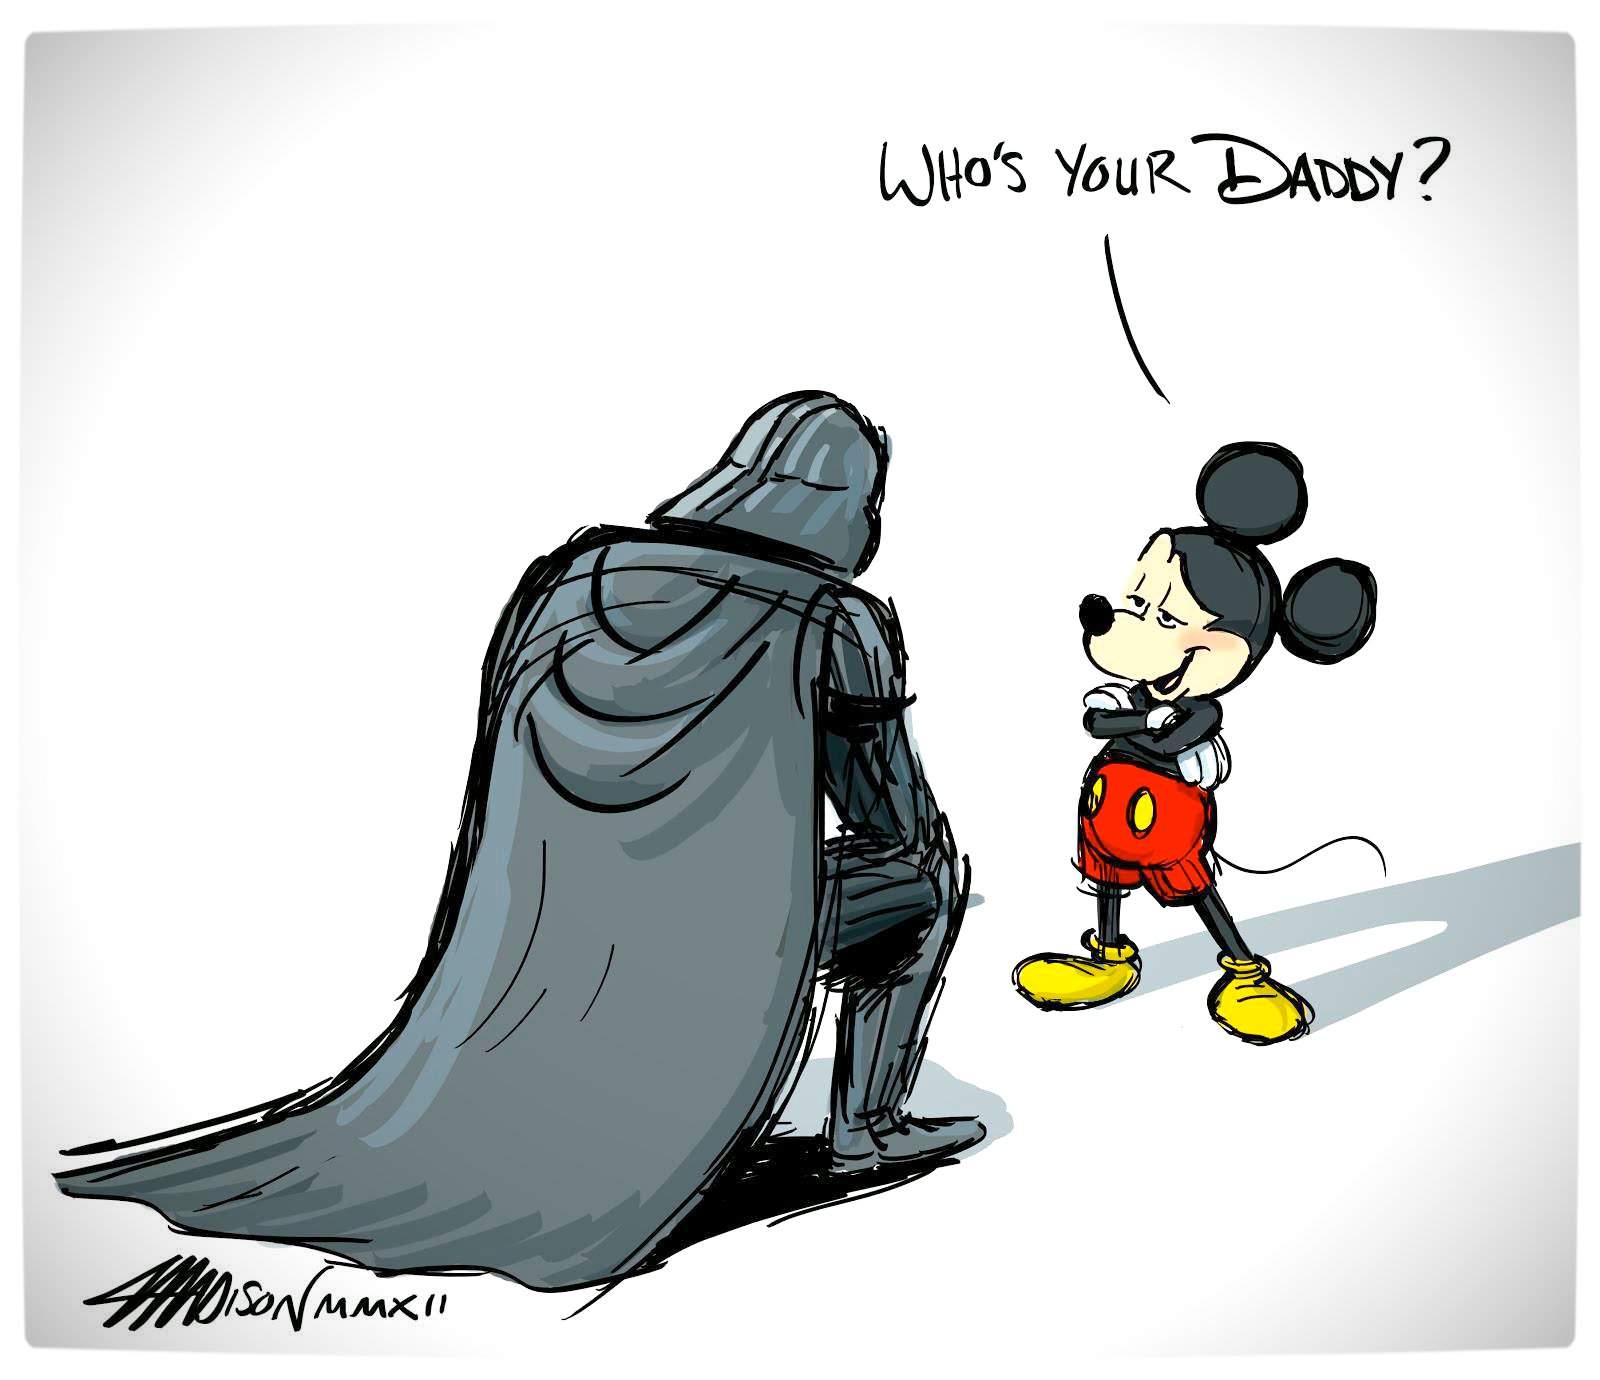 Vamers-FYI-Movies-Disney-Acquires-LucasFilm-Who-is-your-daddy.jpg